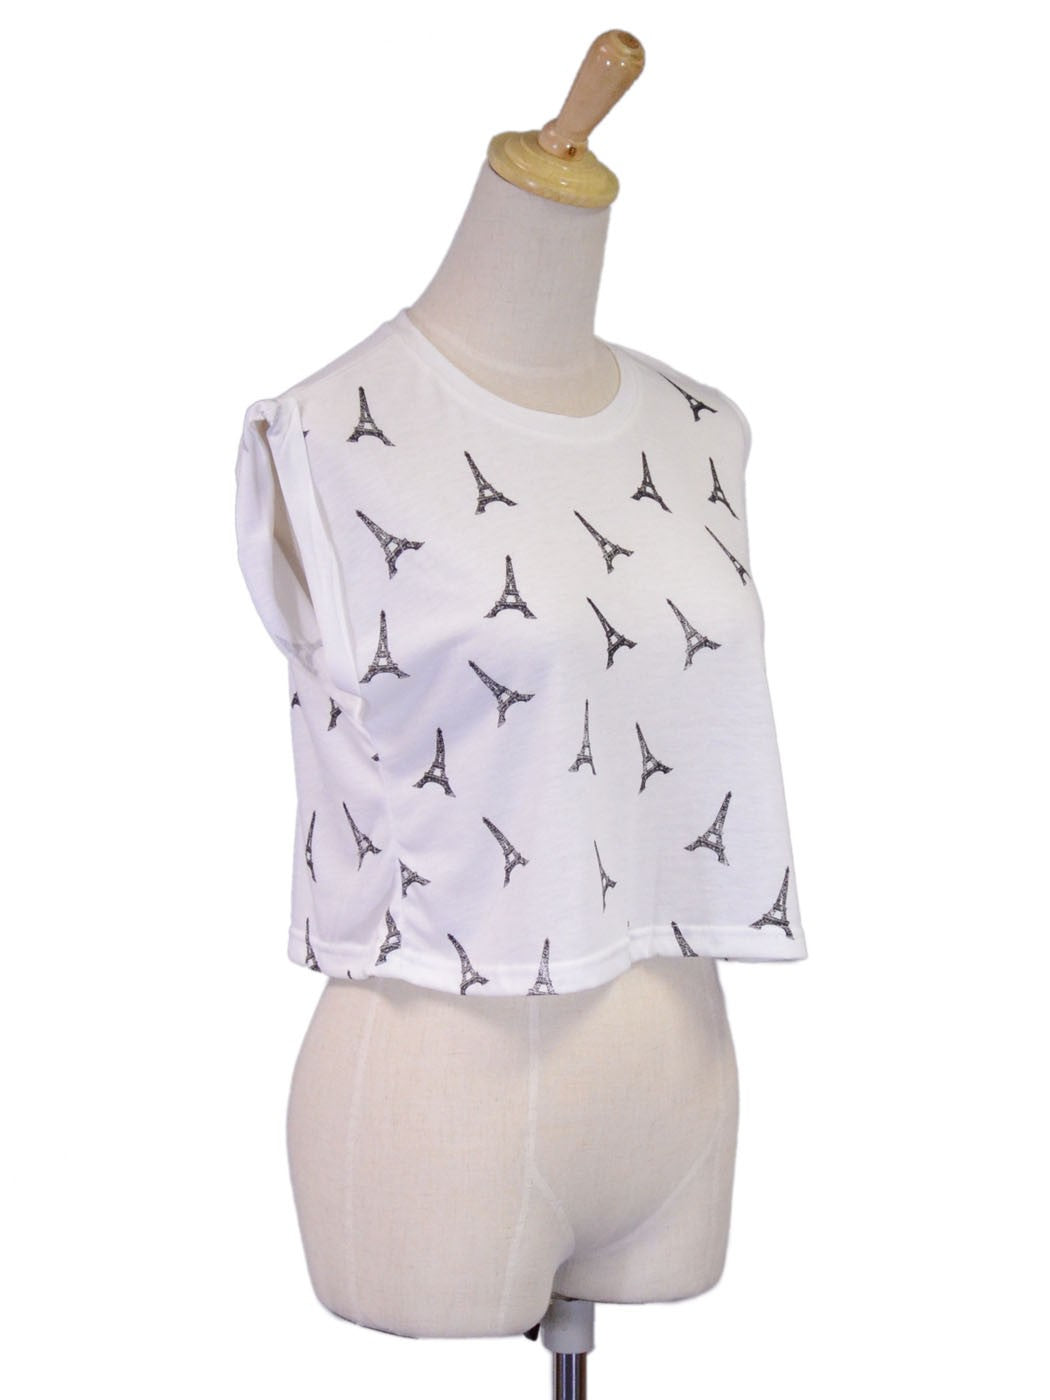 En Creme Scattered Eiffel Tower Print Cropped Sleeveless Crew Neck Top - ALILANG.COM